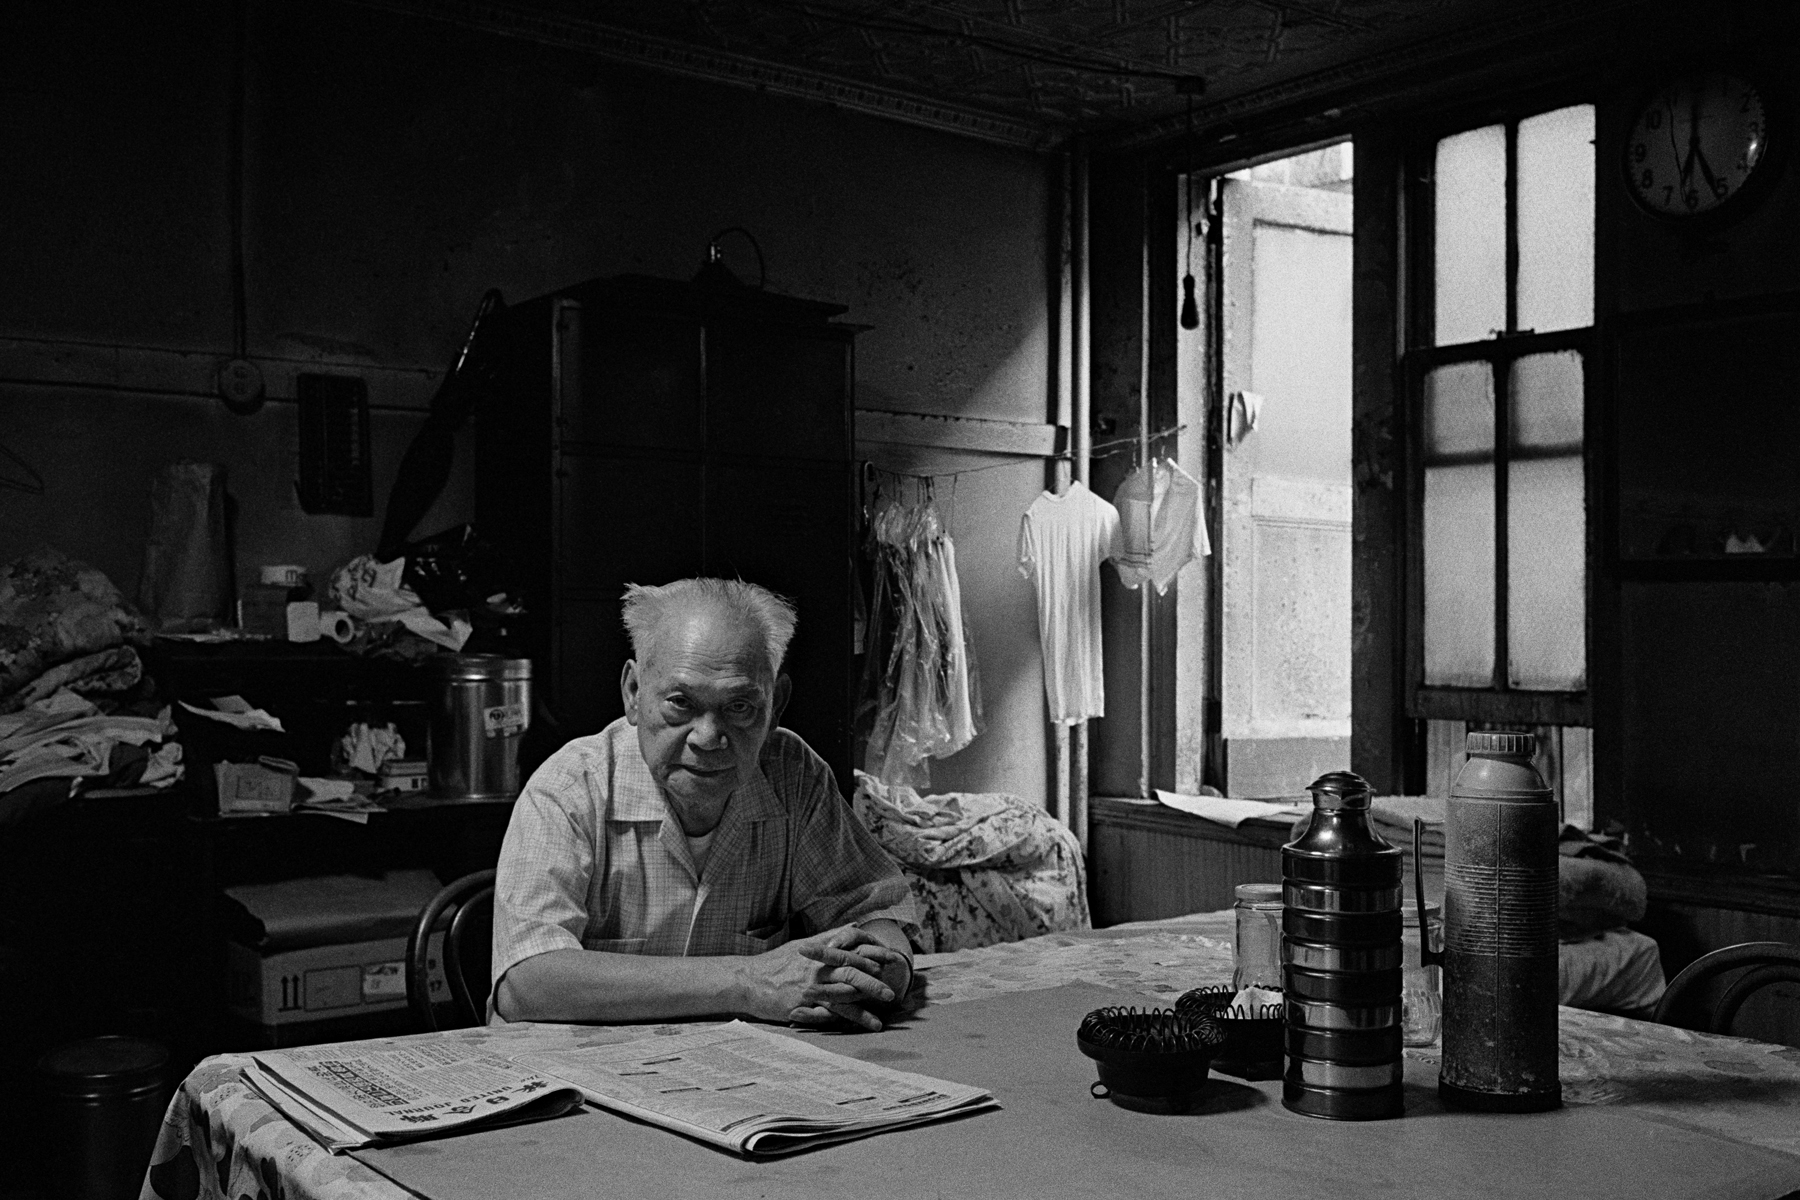 Bachelor Apartment, Mr. Ng, 68 Bayard St., New York City, 1982.Bachelor Apartments, where groups of men lived together, were one result of racist, anti-Chinese immigration laws such as the Chinese Exclusion Act of 1882. I met Mr. Ng on a field trip, organized by the Chinatown Senior Citizens’ Center. He did not speak English but somehow, we arranged for me to photograph him where he lived. Four men lived in this apartment with very little privacy. In each corner of the room there was a bed, and around each bed were a person’s belongings.The 1882 Chinese Exclusion Act, the first law to bar an entire race from entering America, also prevented those already in the U.S. from bringing their families over and made it illegal for Chinese men to marry outside their race. Thus, New York Chinatown (like all Chinatowns in the United States) was a predominately male society until after passage of the 1965 Immigration Act which did away with national origin quotas.